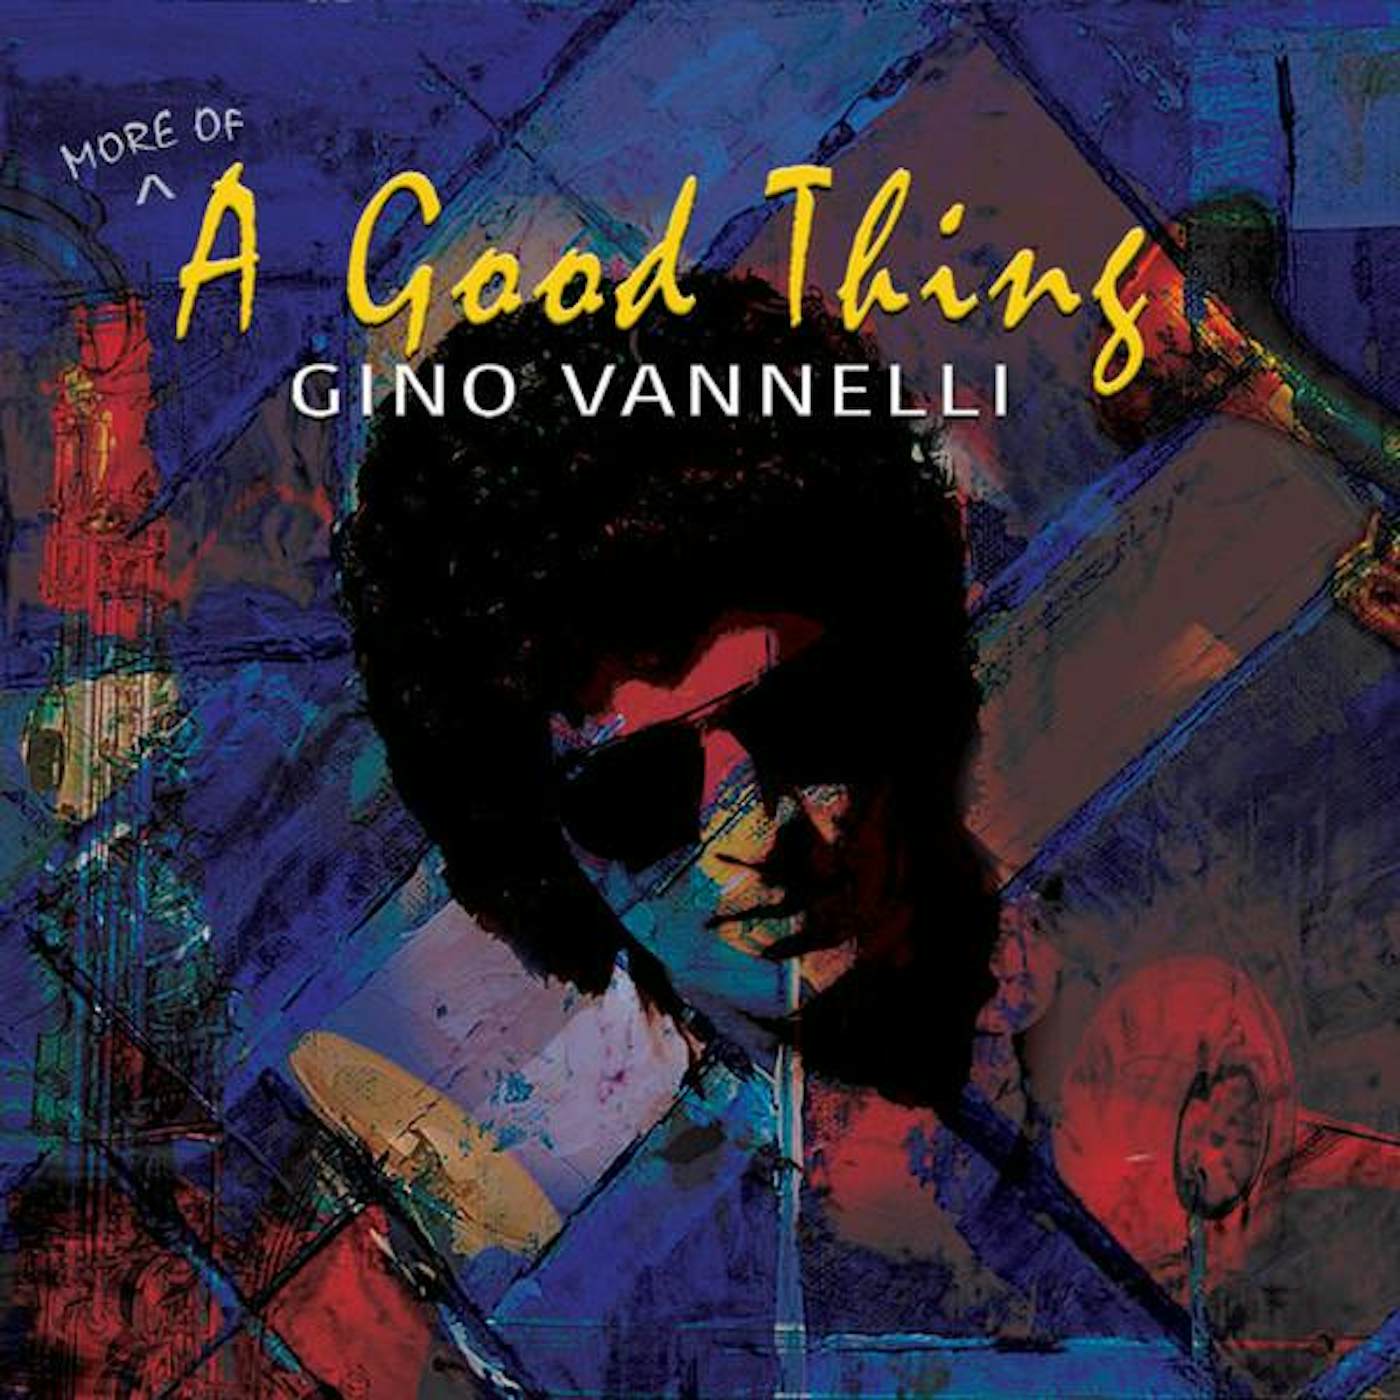 Gino Vannelli (MORE OF) A GOOD THING CD